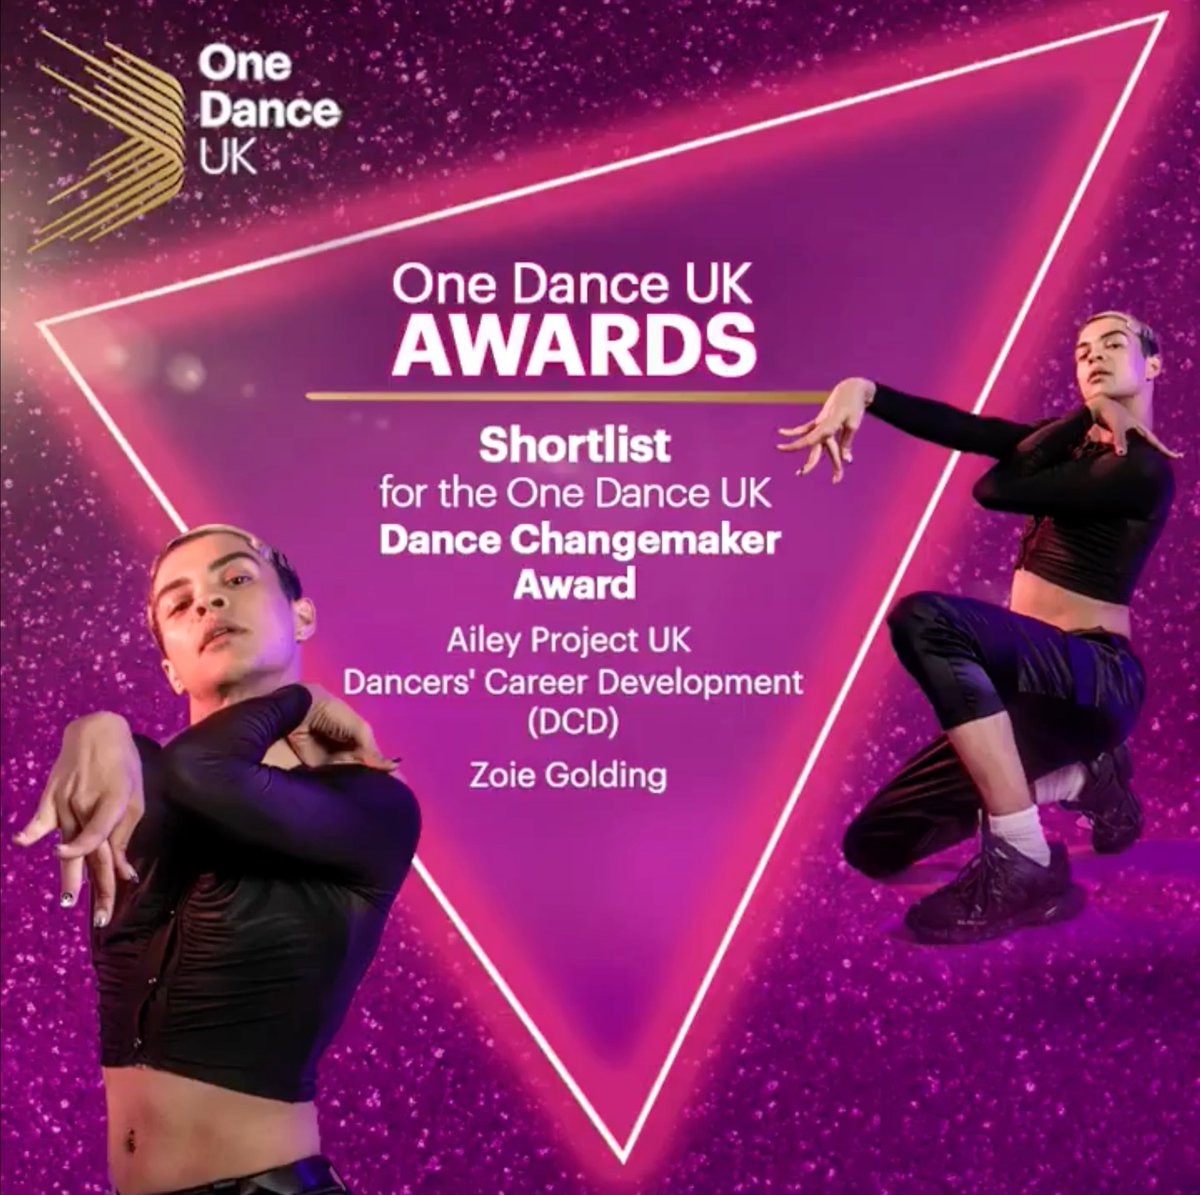 We are thrilled & proud to have been nominated for The Green Dance Award at the @OneDanceUK Awards! ♻️💚 Also wonderful to see #AileyProjectUK nominated for the Dance Changemaker Award! Looking forward to the ceremony on 10 February! ✨ #OneDanceUK #OneDanceUKAwards